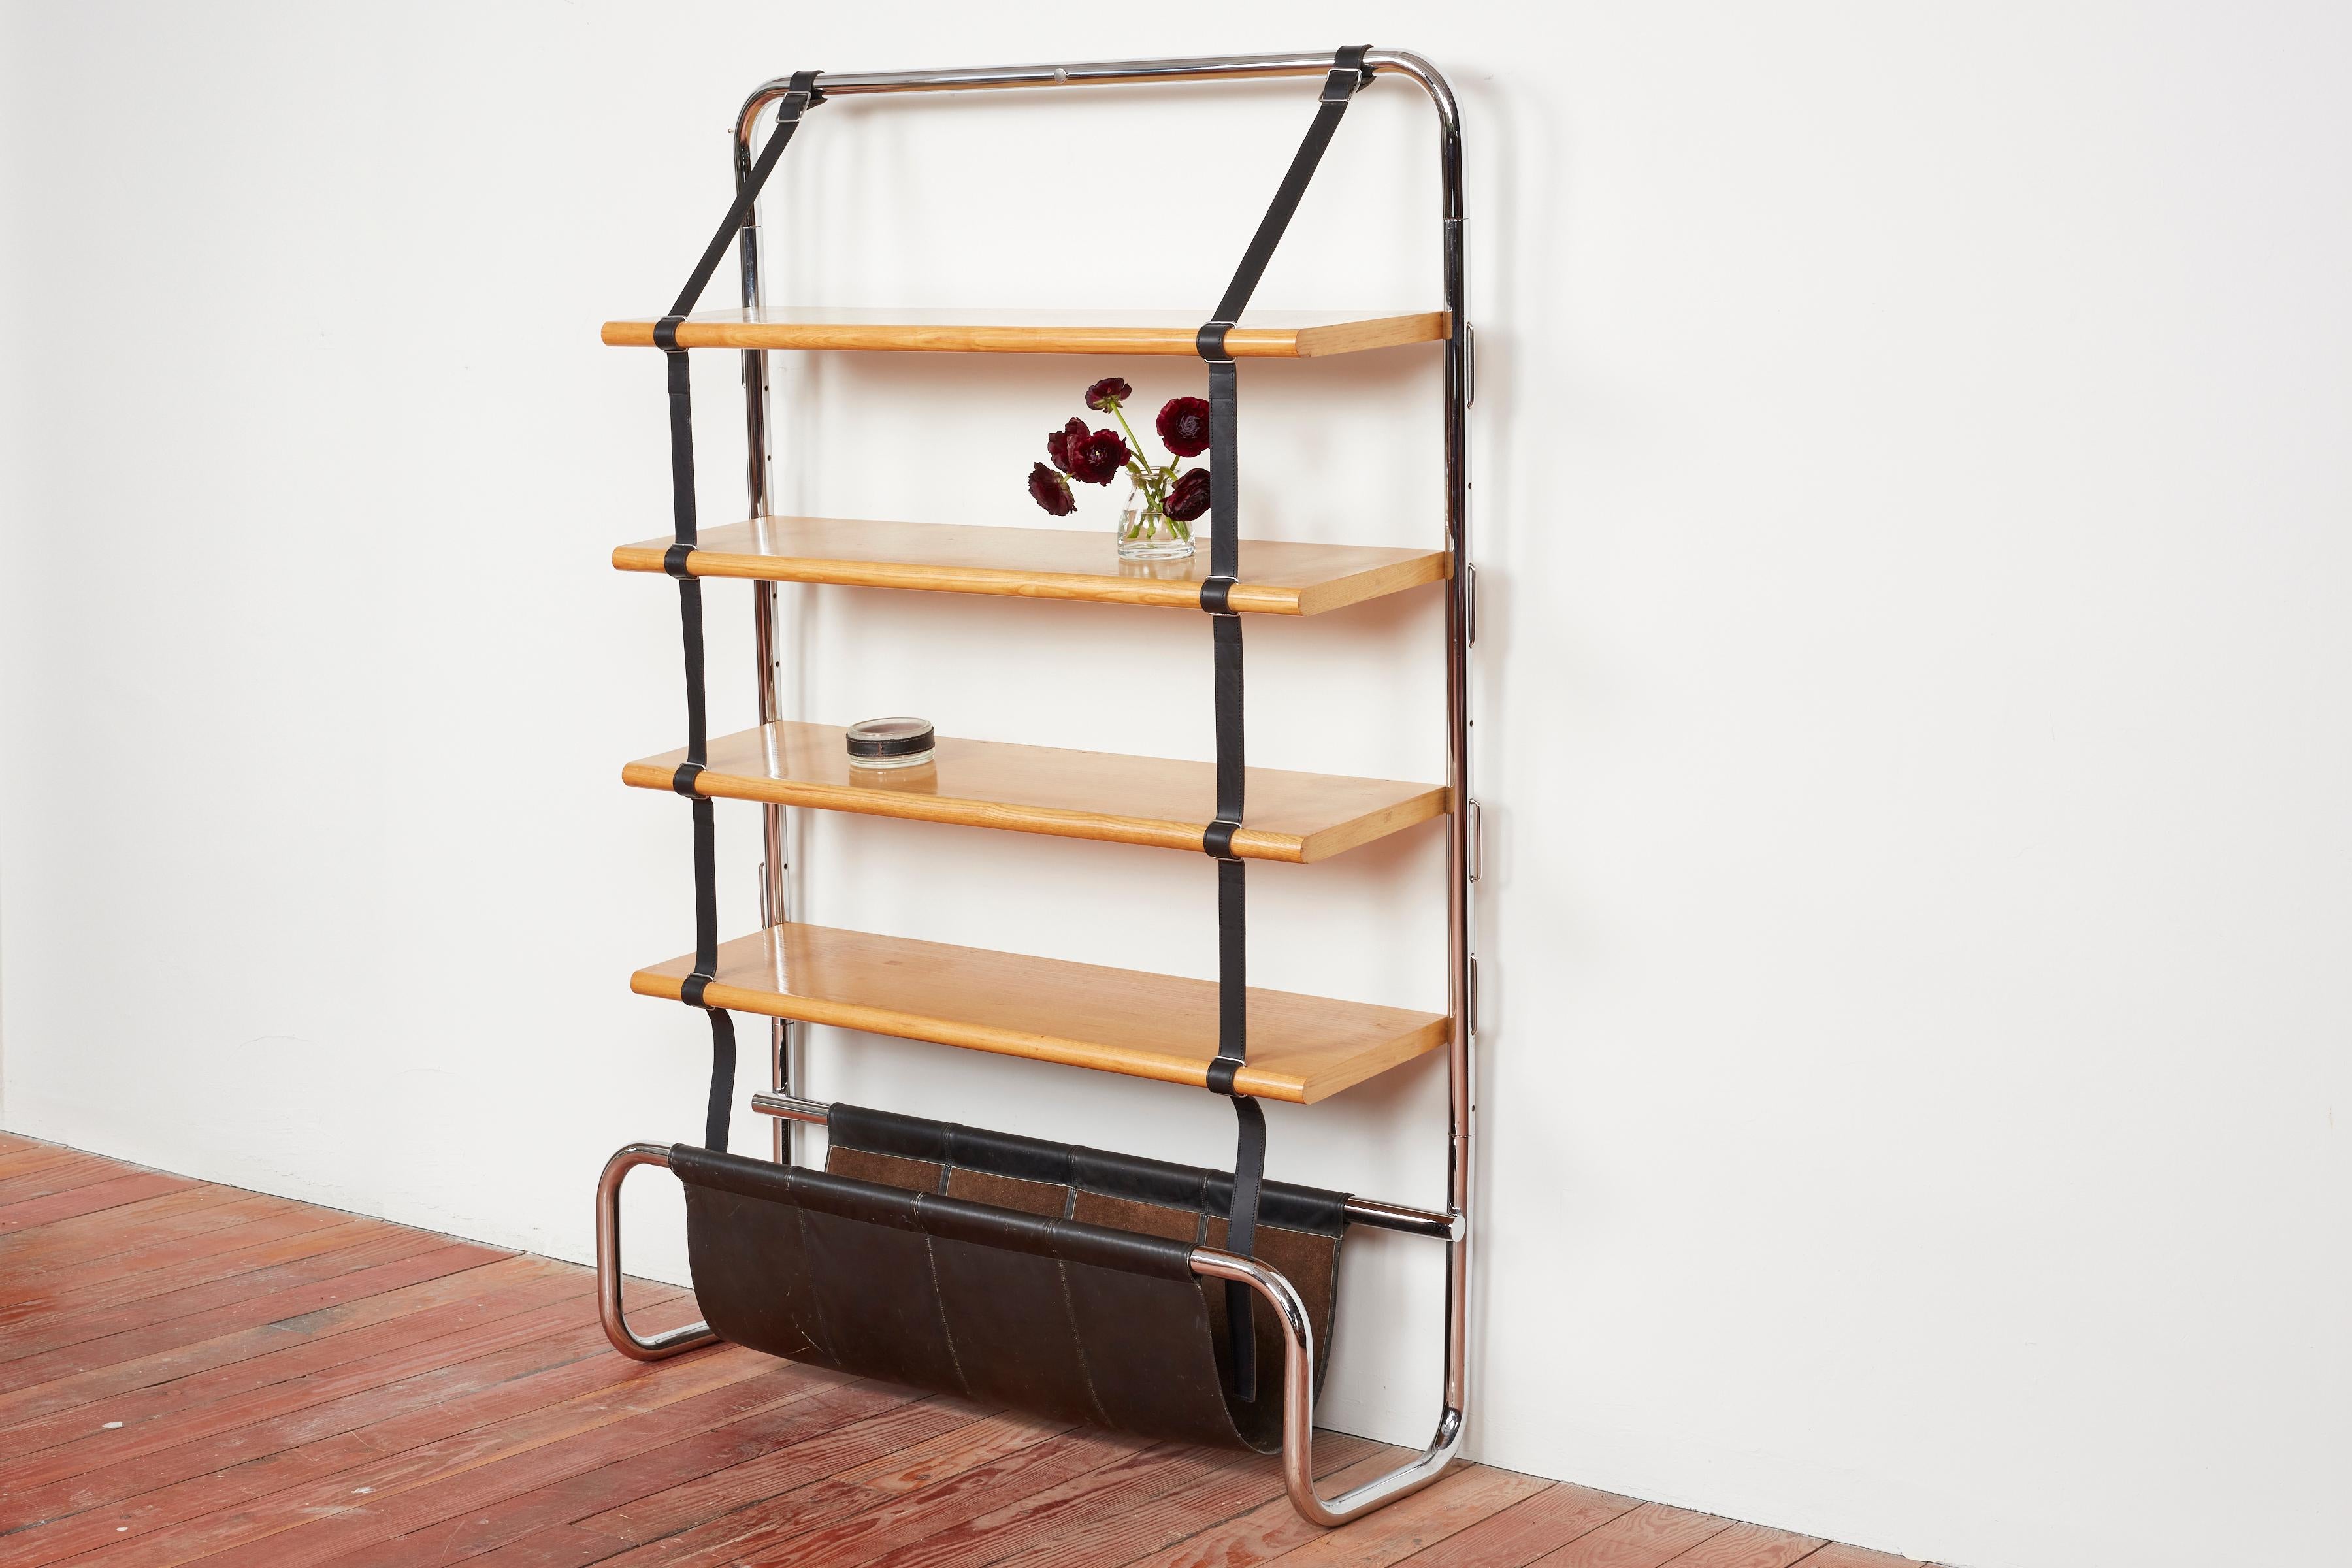 Wonderful bookcase by Luigi Massoni for Poltrona - Italy, circa 1970s

Impressive large scale Italian wall shelf designed by Luigi Massoni for Poltrona Frau, 1971. 
Chromed tubular steel frame with natural wood shelves suspended by black leather